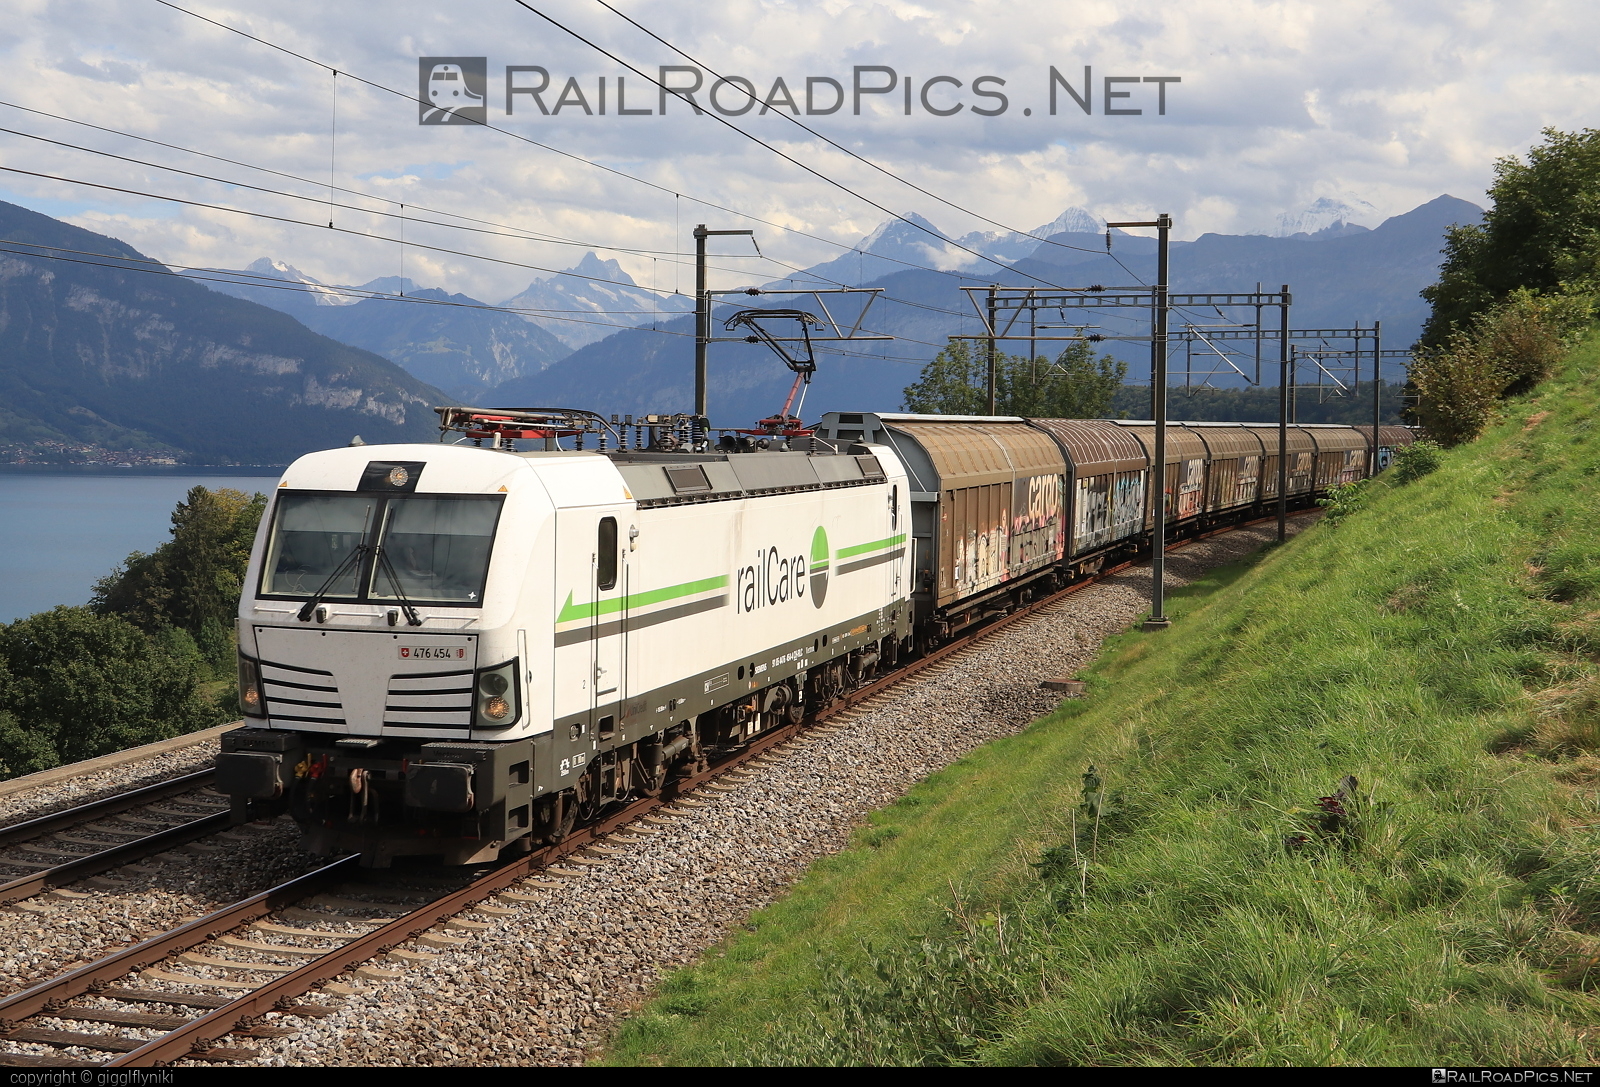 Siemens Vectron AC - 476 454 operated by railCare AG #railcare #rlc #siemens #siemensVectron #siemensVectronAC #vectron #vectronAC